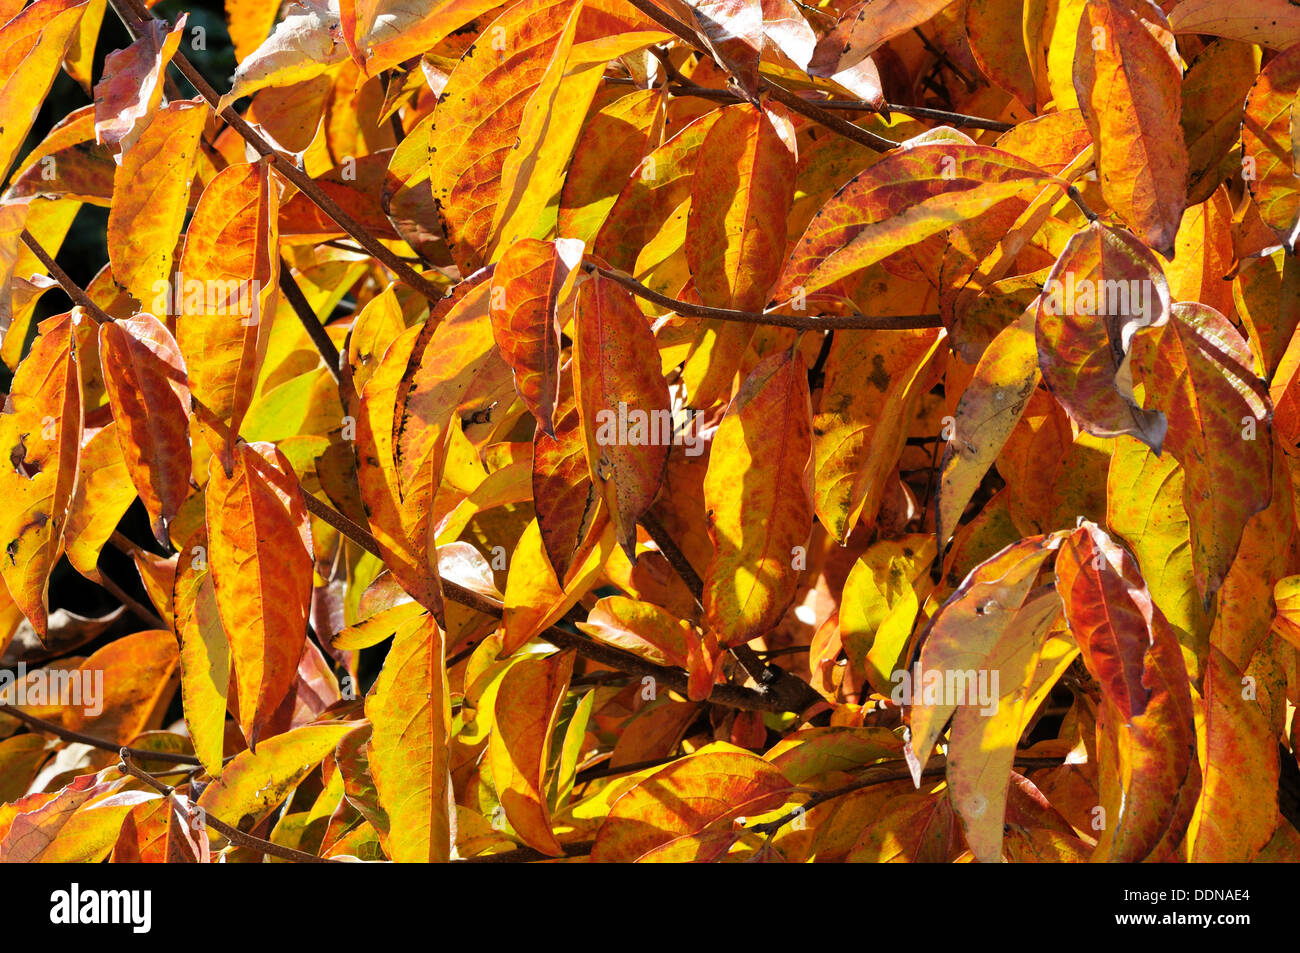 Autumn leaves on a Persimmon tree, Andalucia, Spain, Western Europe. Stock Photo